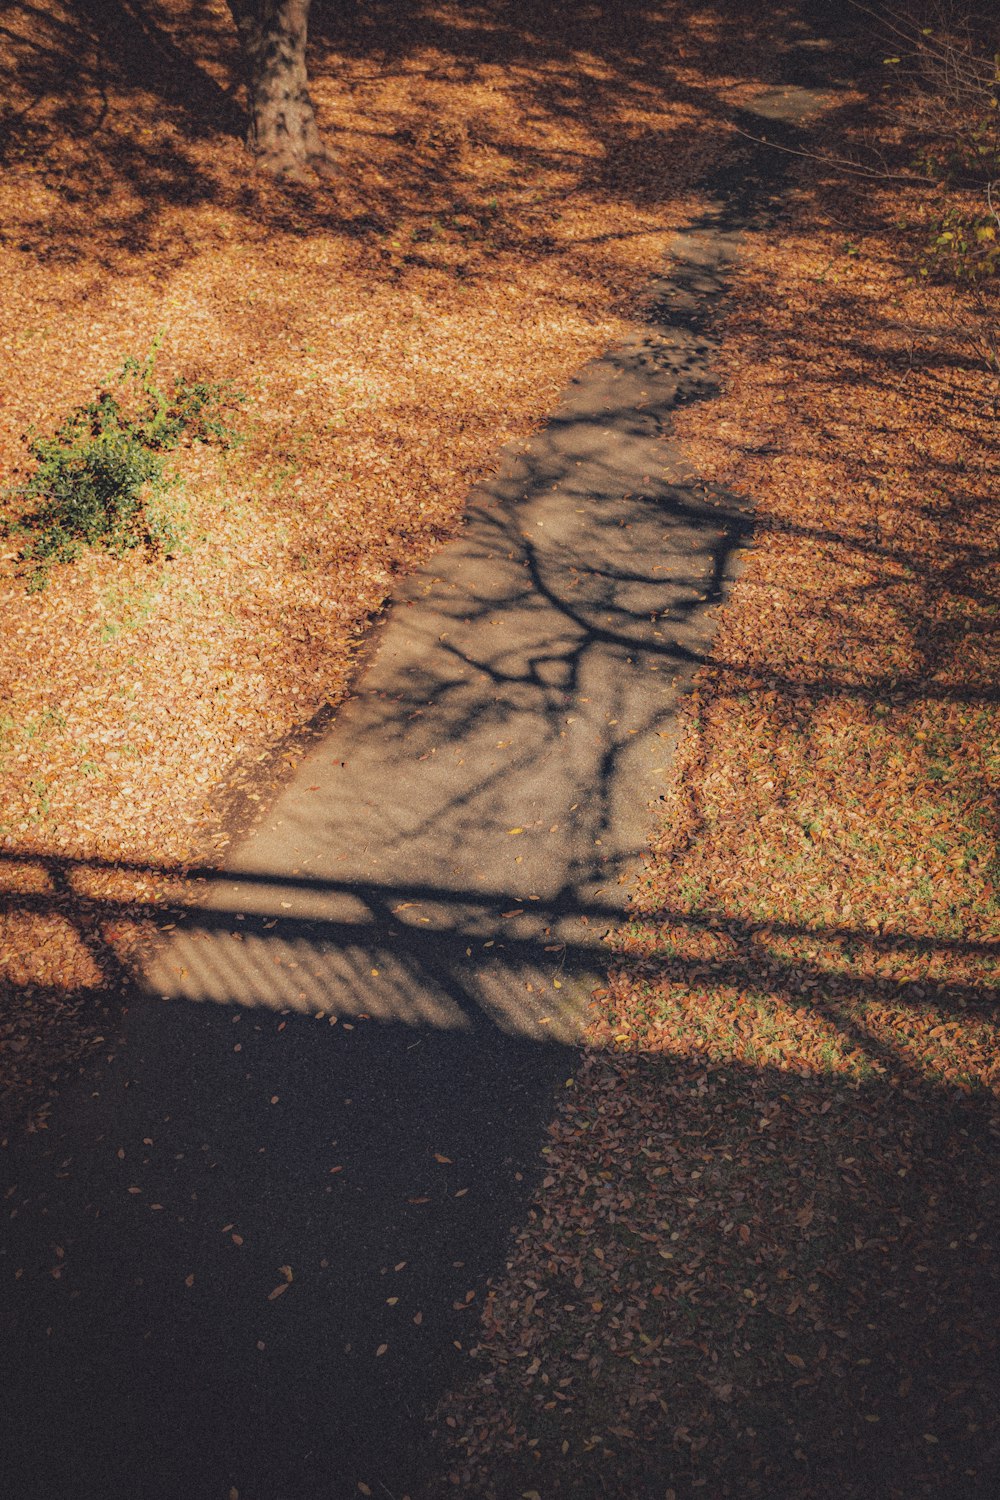 a shadow of a tree on the ground